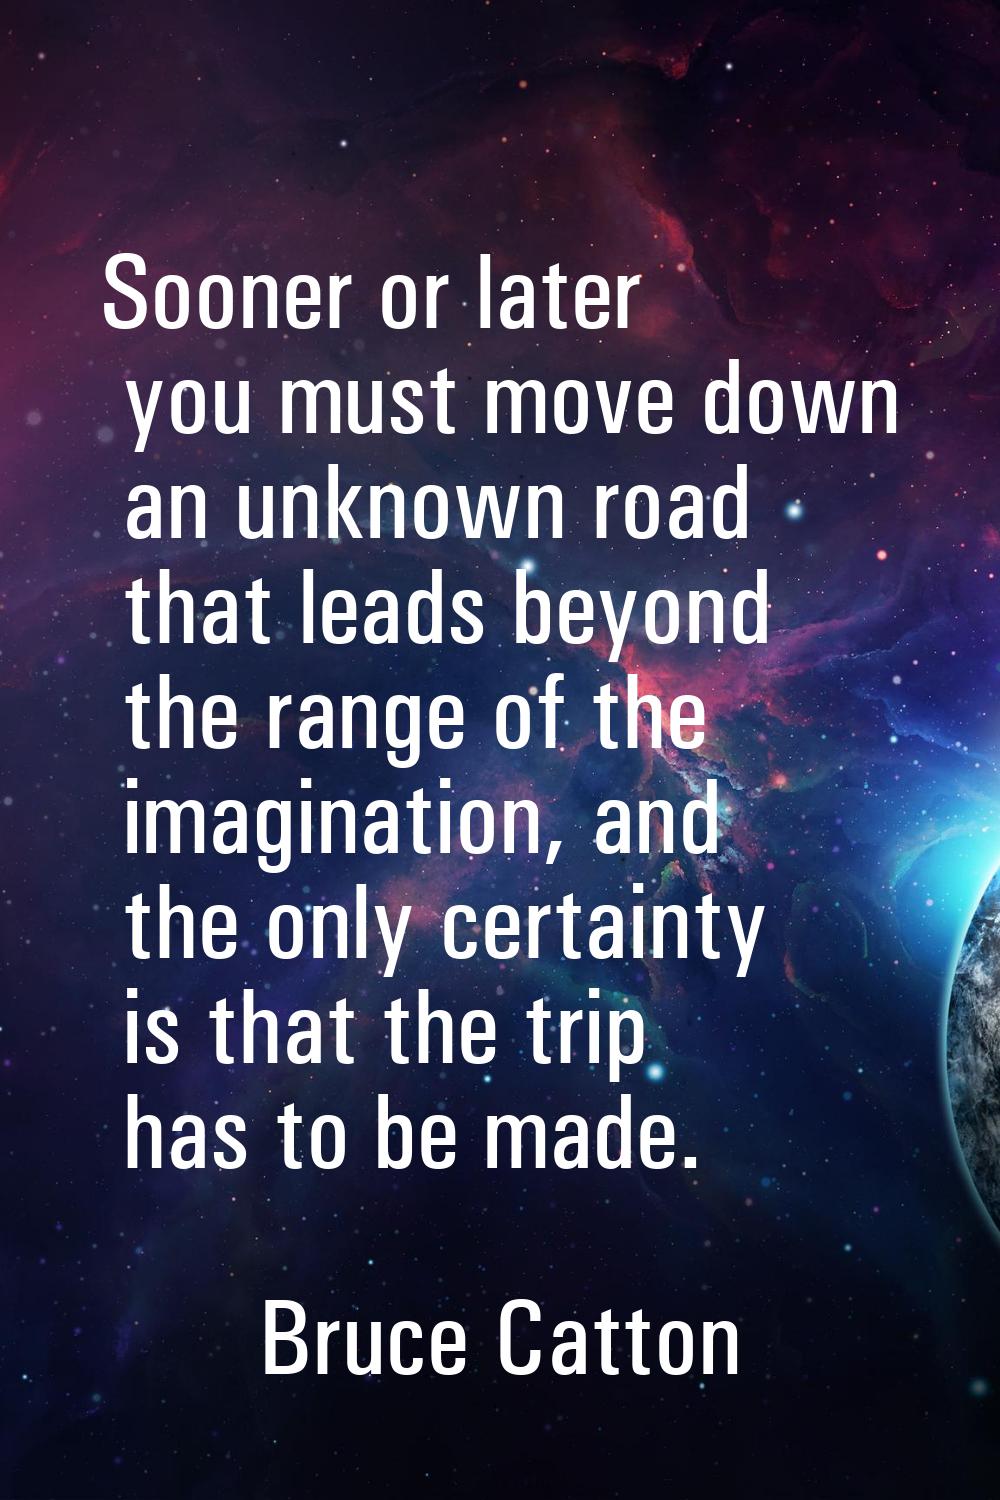 Sooner or later you must move down an unknown road that leads beyond the range of the imagination, 